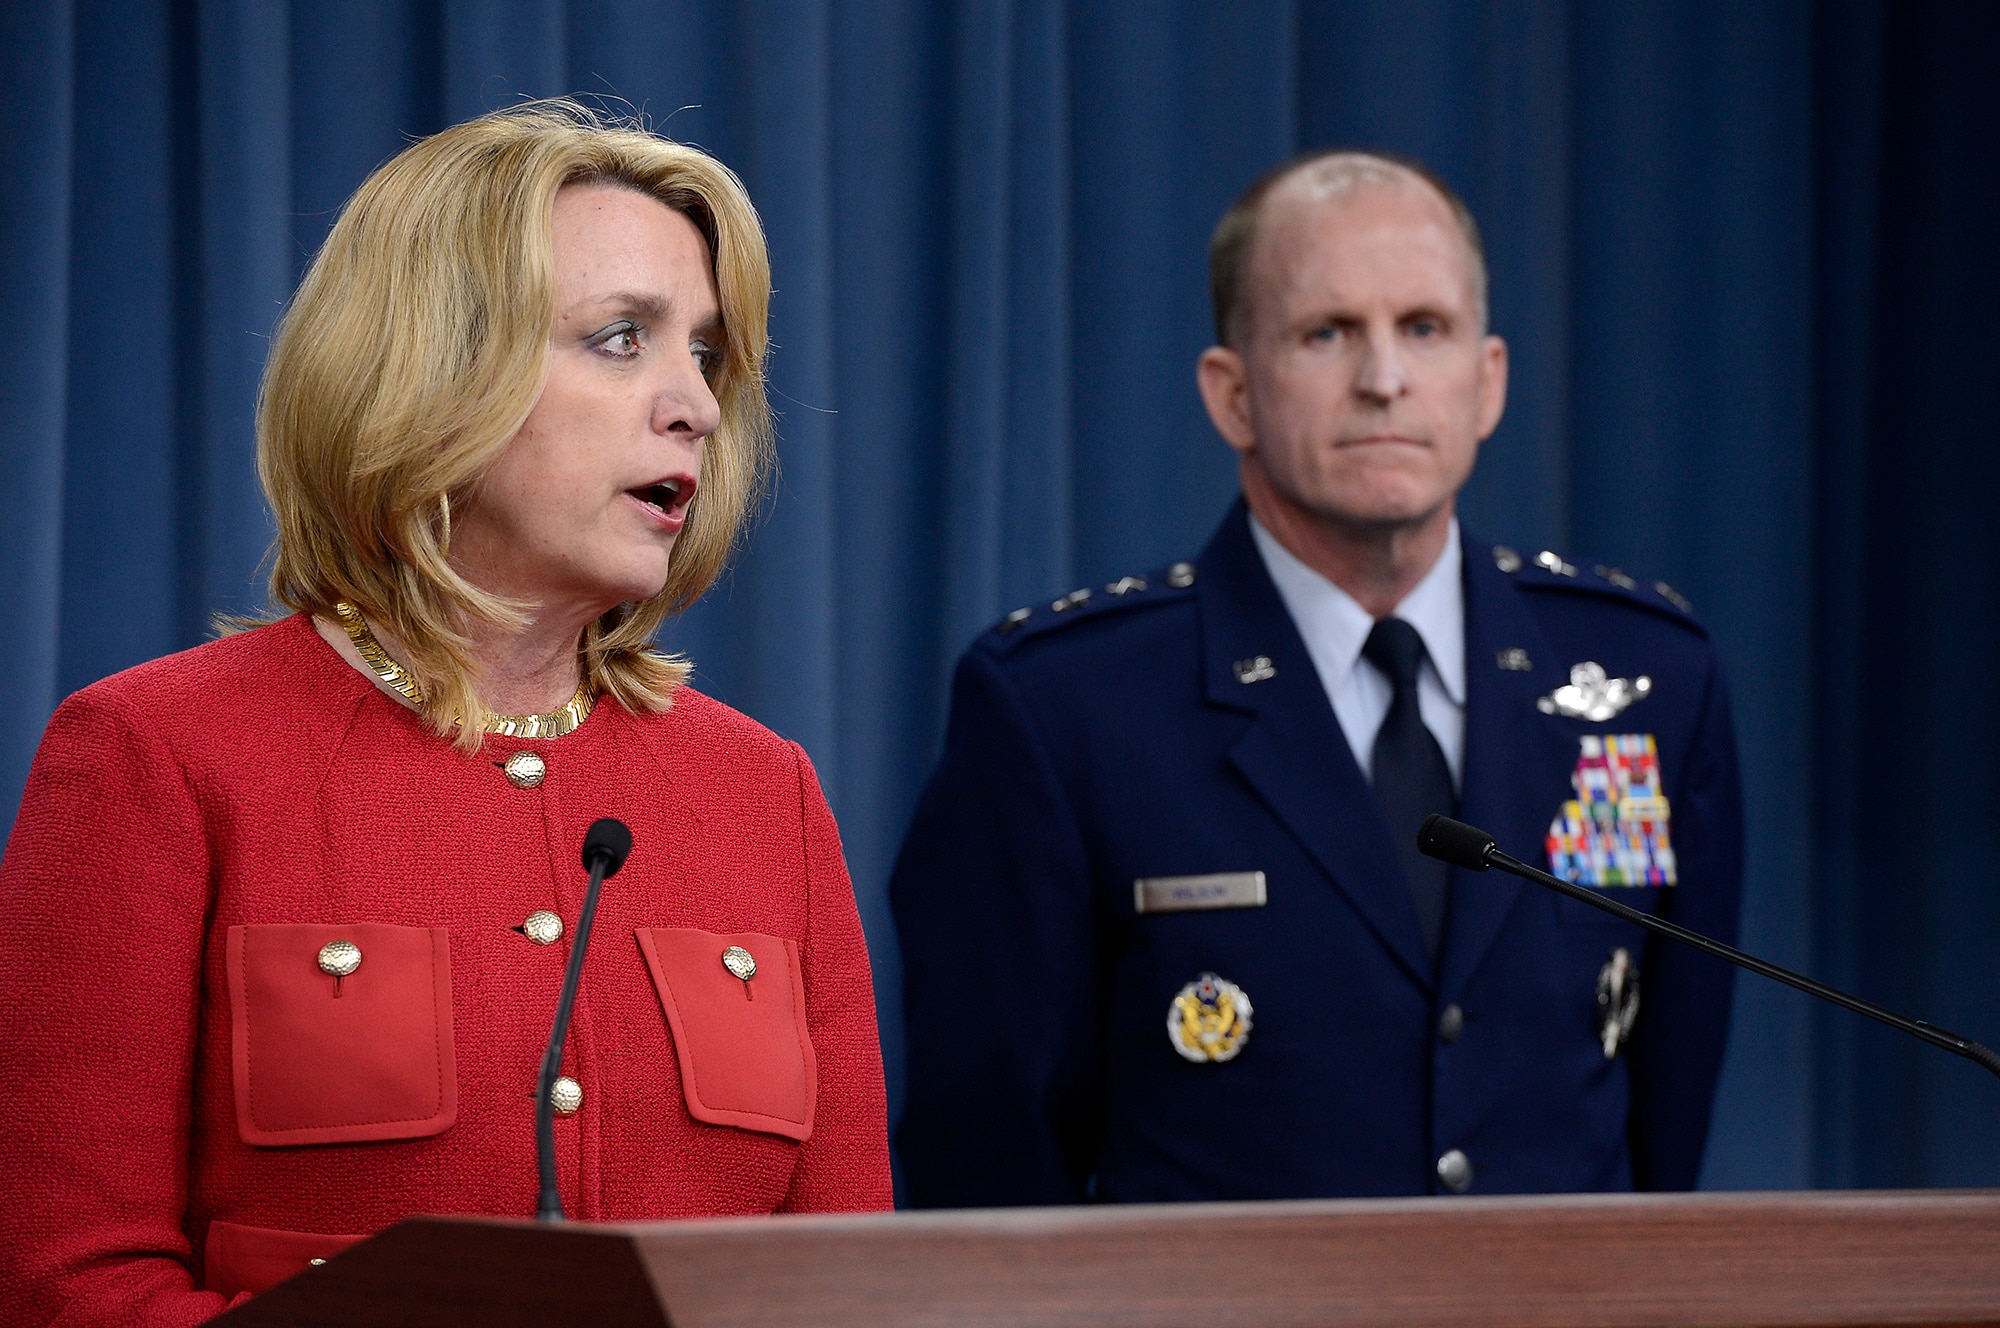 Secretary of the Air Force Deborah Lee James and Lt. Gen. Stephen Wilson provide updates on the Malmstrom Air Force Base, Mont., test compromise investigation findings to the Pentagon Press Corps March 27, 2014, in Washington, D.C. Air Force leaders discussed personnel accountability and the action plan to improve the nuclear enterprise. Wilson is the Global Strike Command commander. (U.S. Air Force photo/Scott M. Ash)